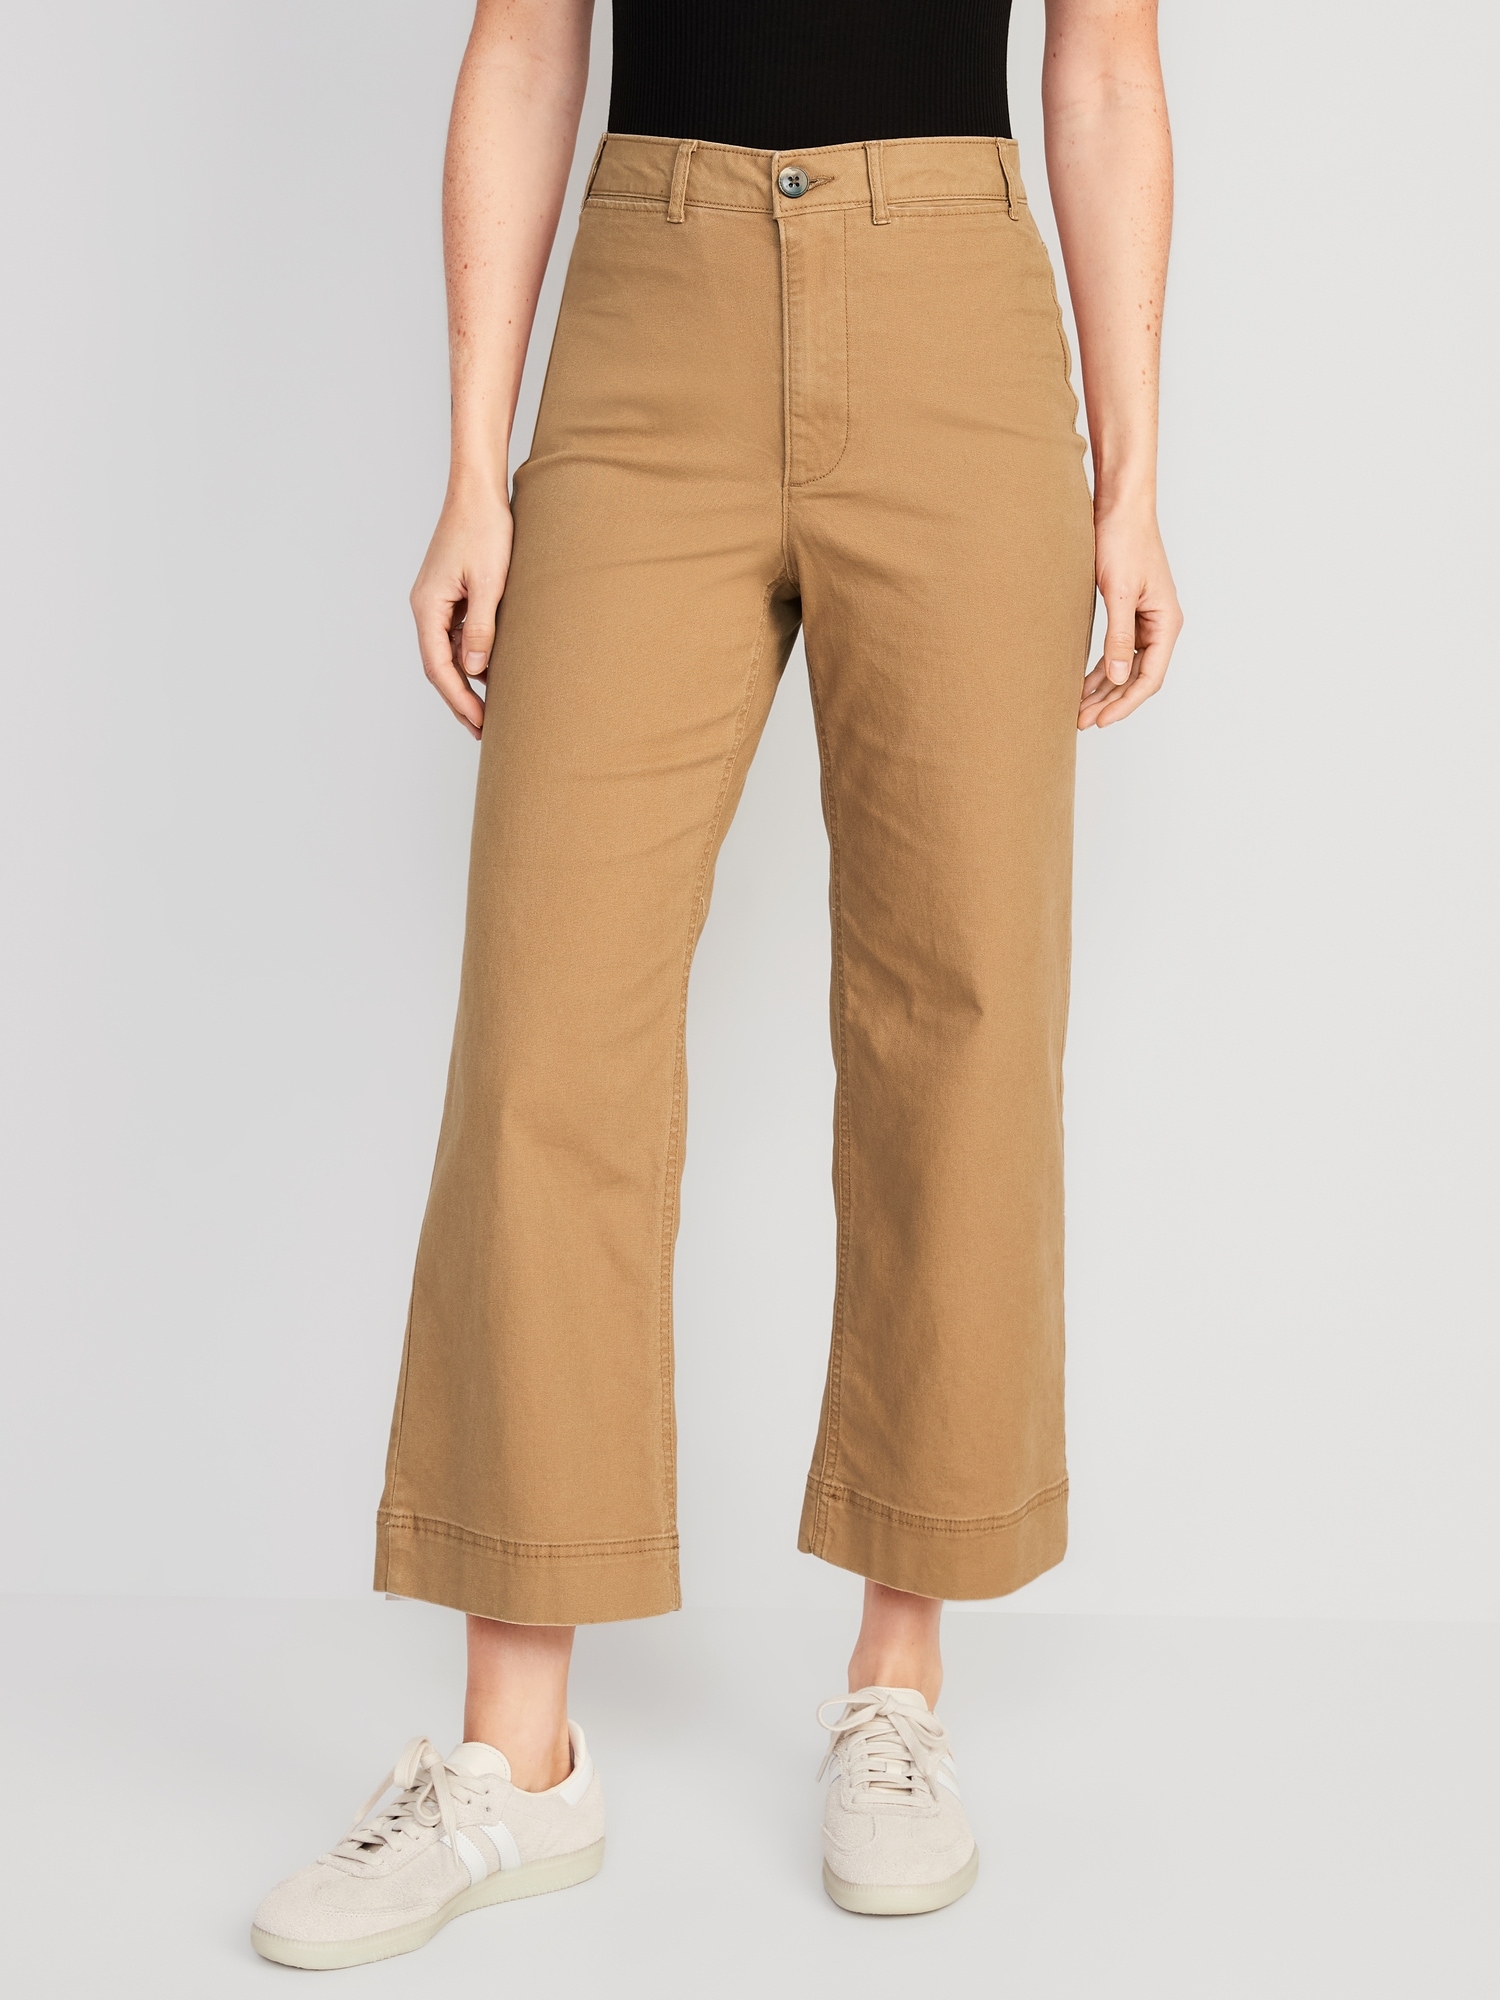 CASUAL PANTS FOR WOMEN | OVER 30 STYLES FROM XS - 3XL | UNIQLO SG-seedfund.vn